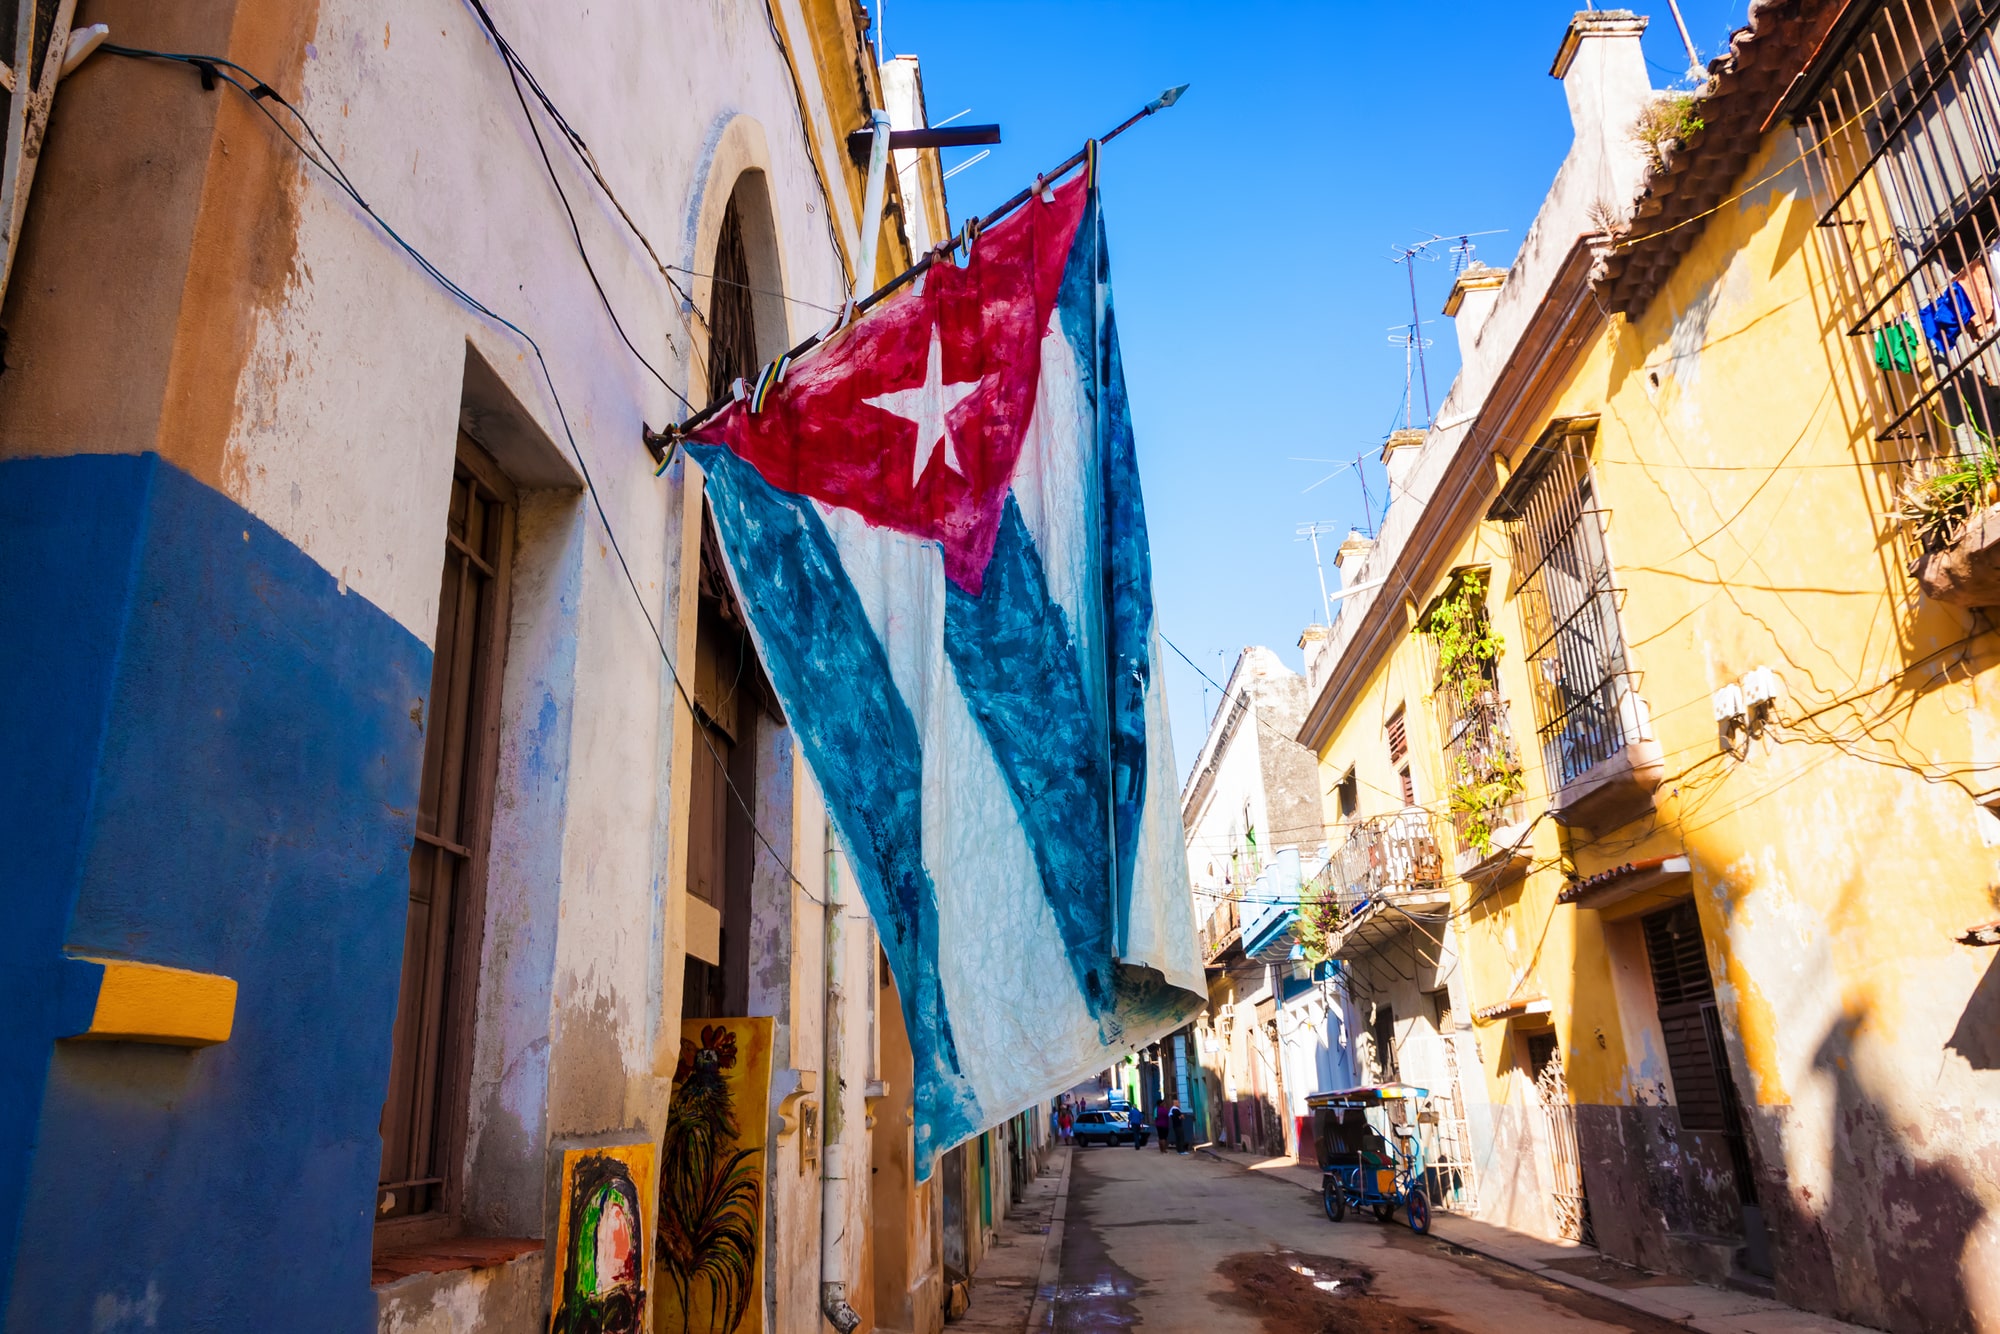 Cuba plans to recognize and regulate cryptocurrency